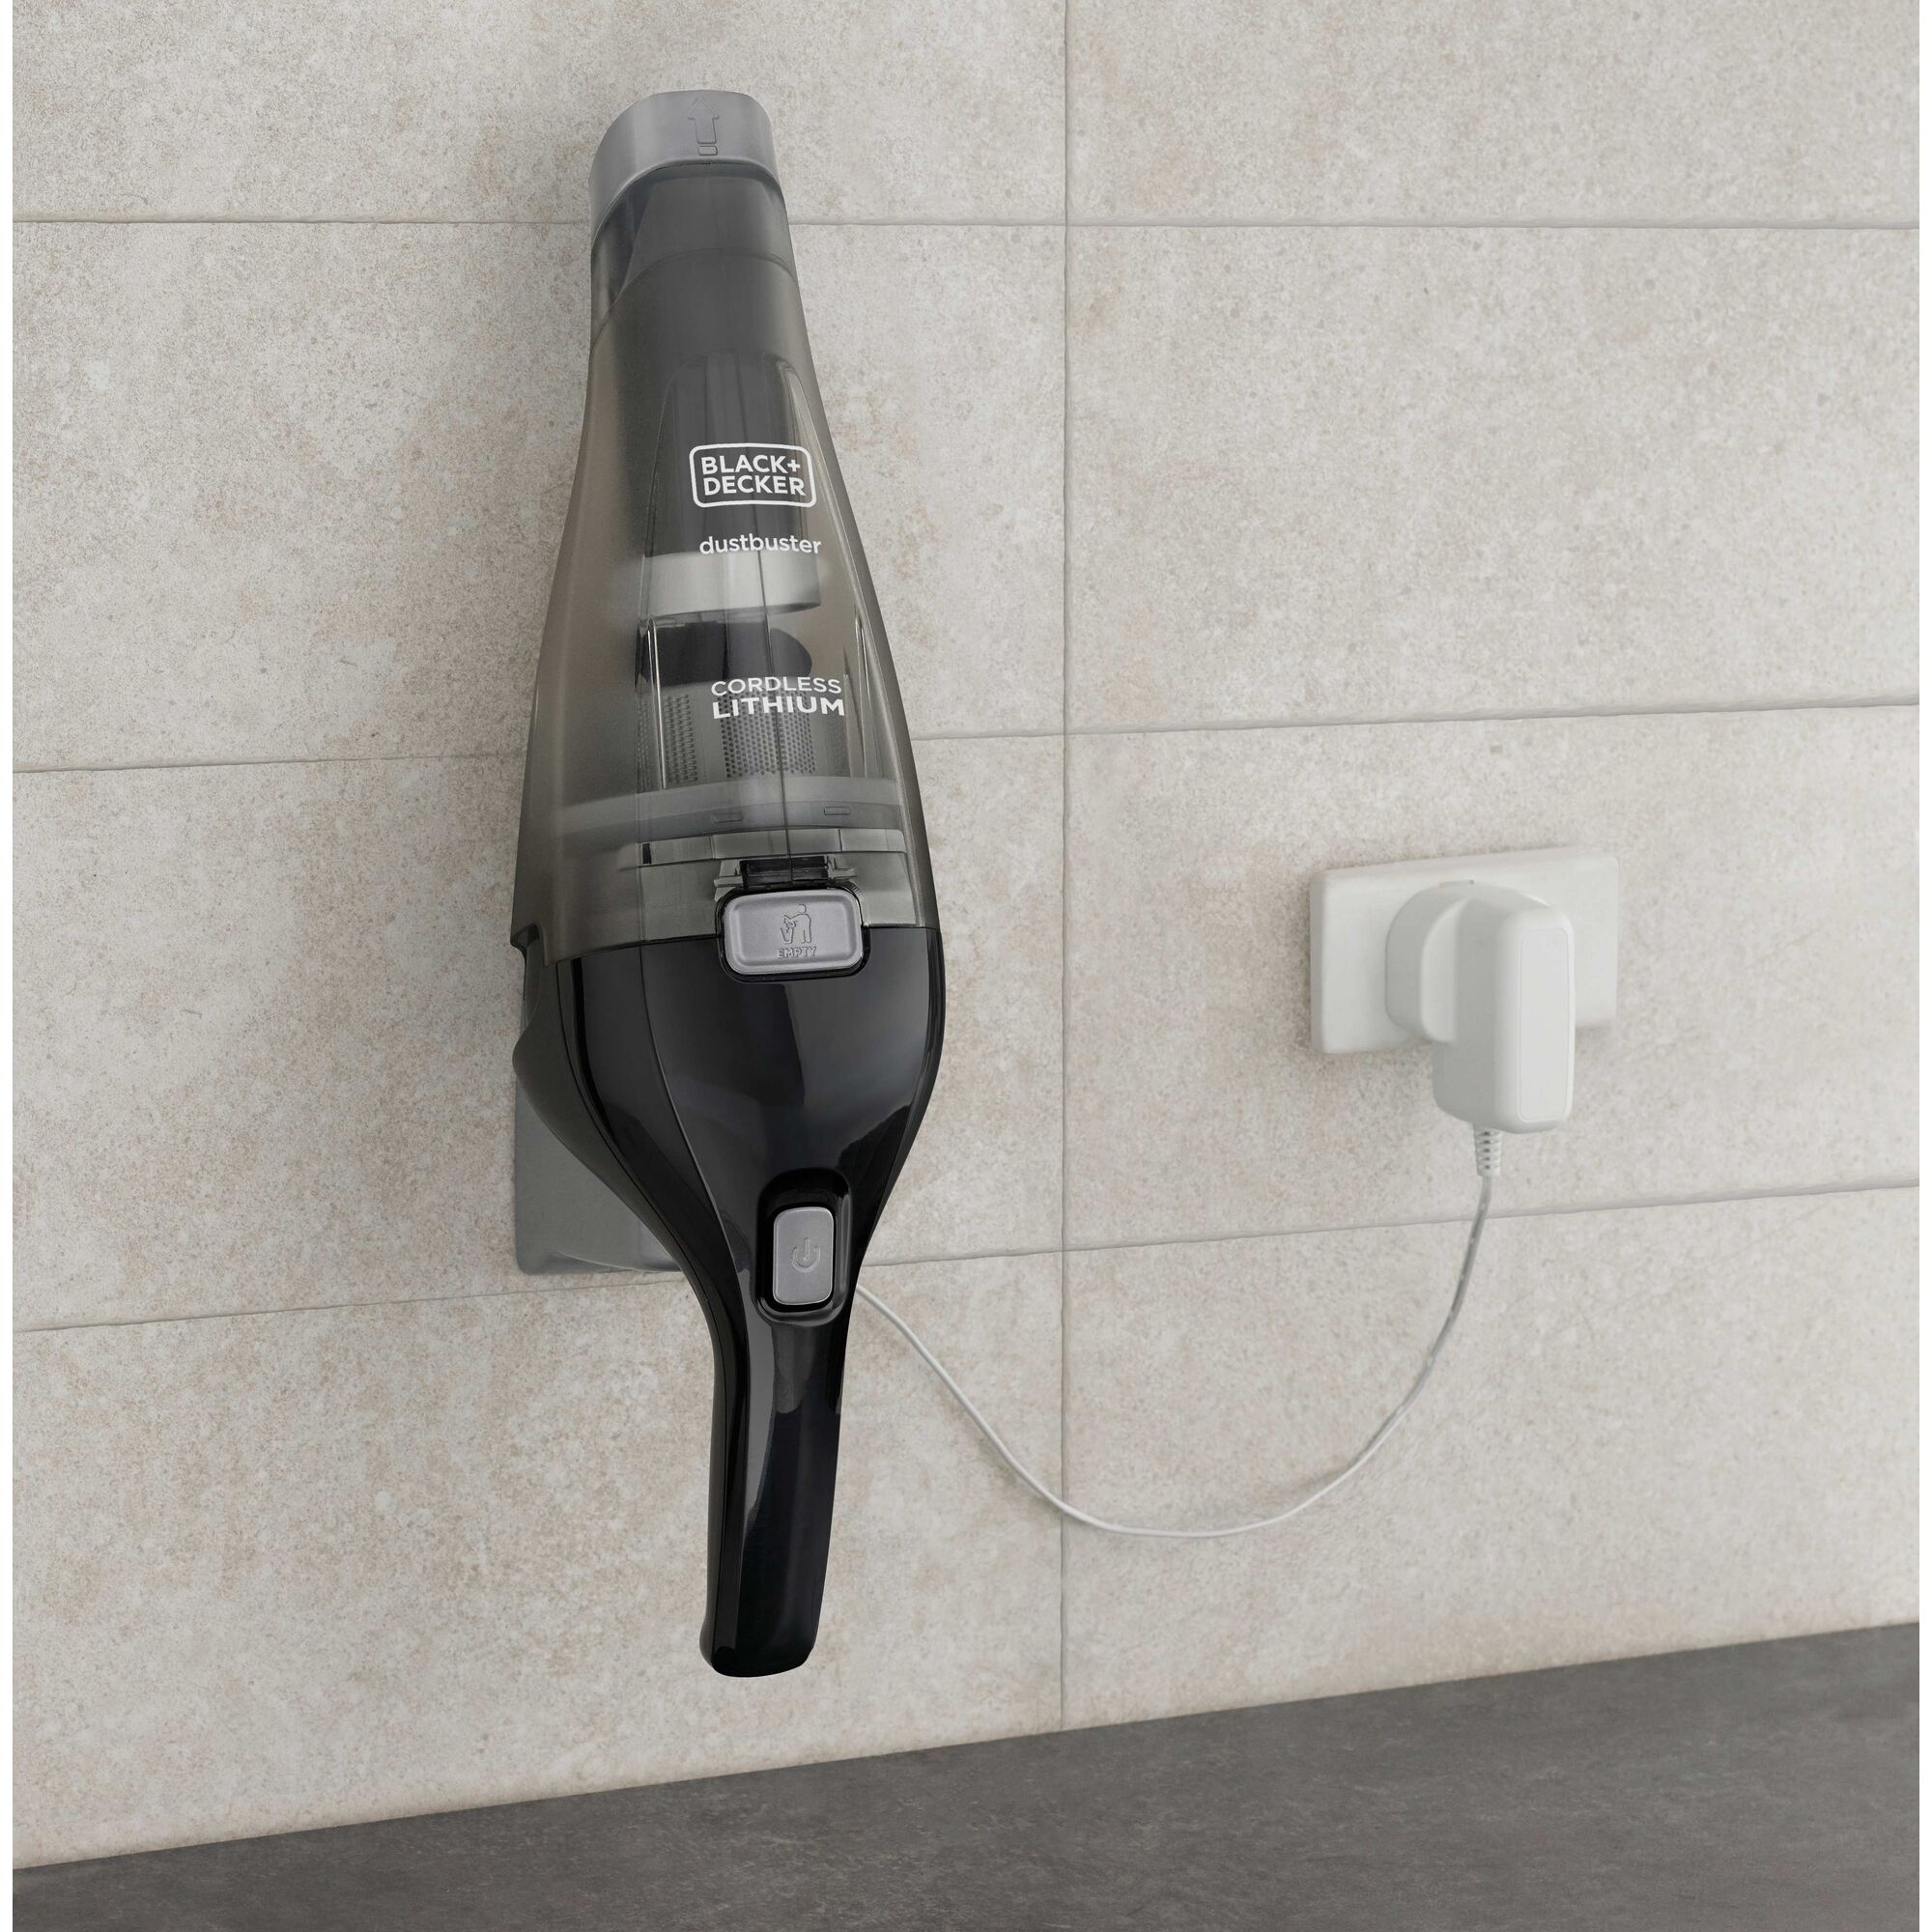 Wall mountable charging feature of dustbuster QuickClean cordless hand vacuum.